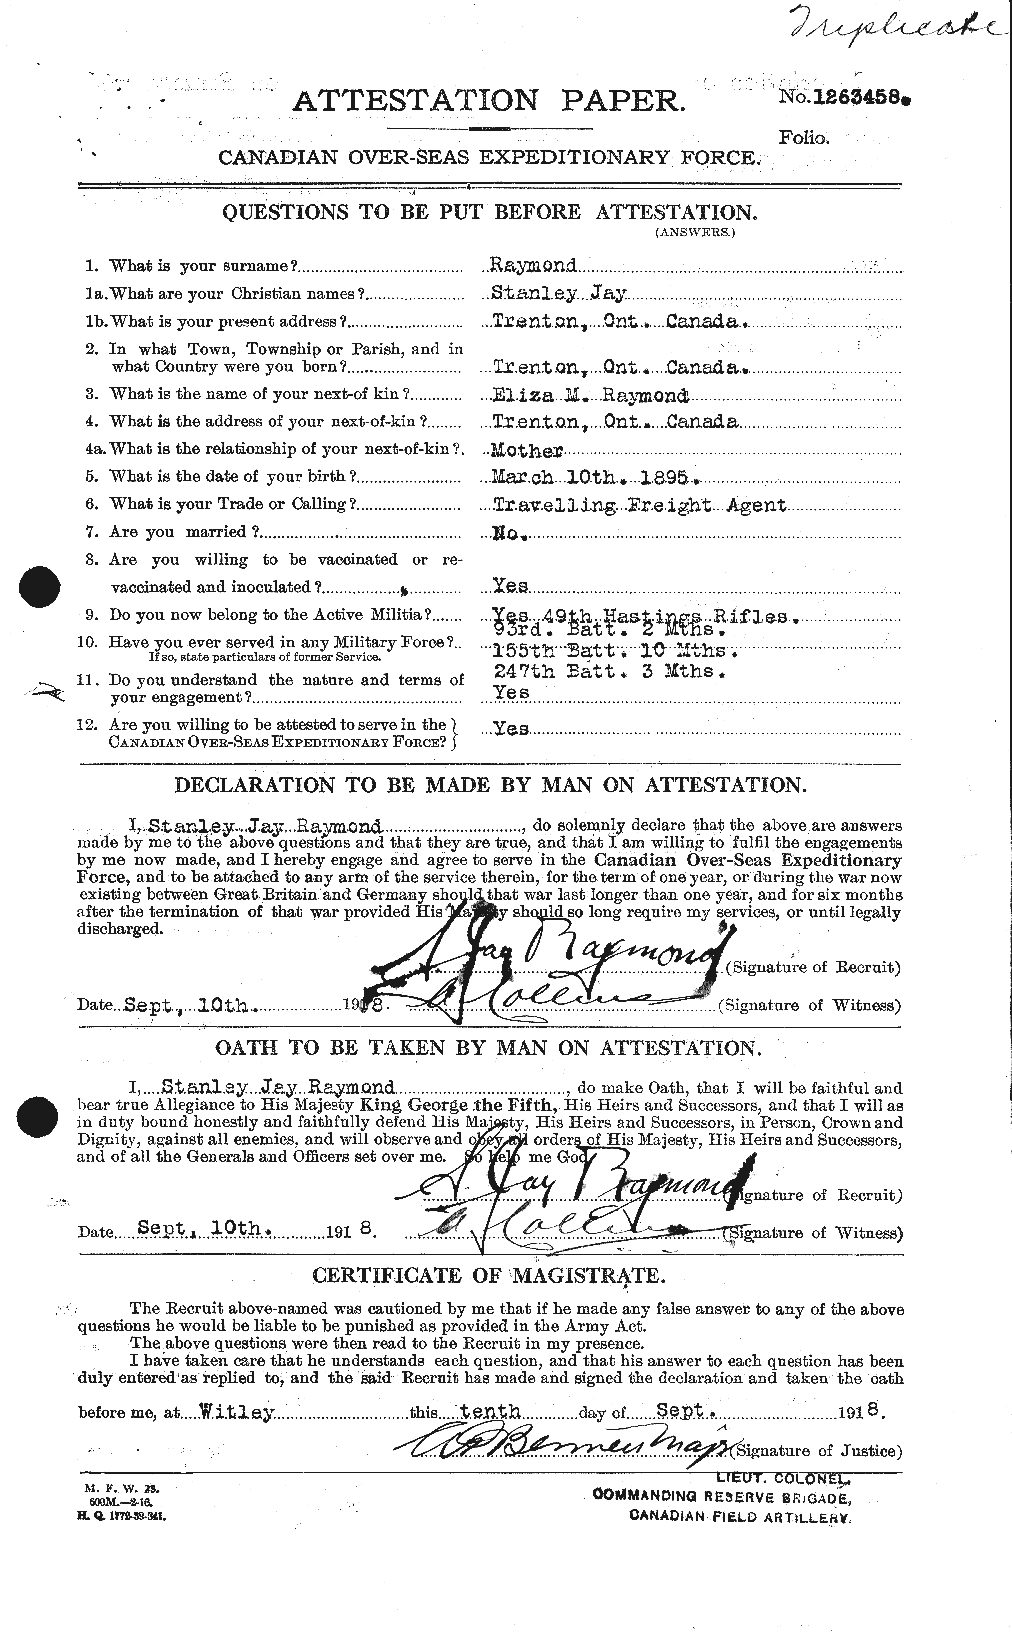 Personnel Records of the First World War - CEF 595463a